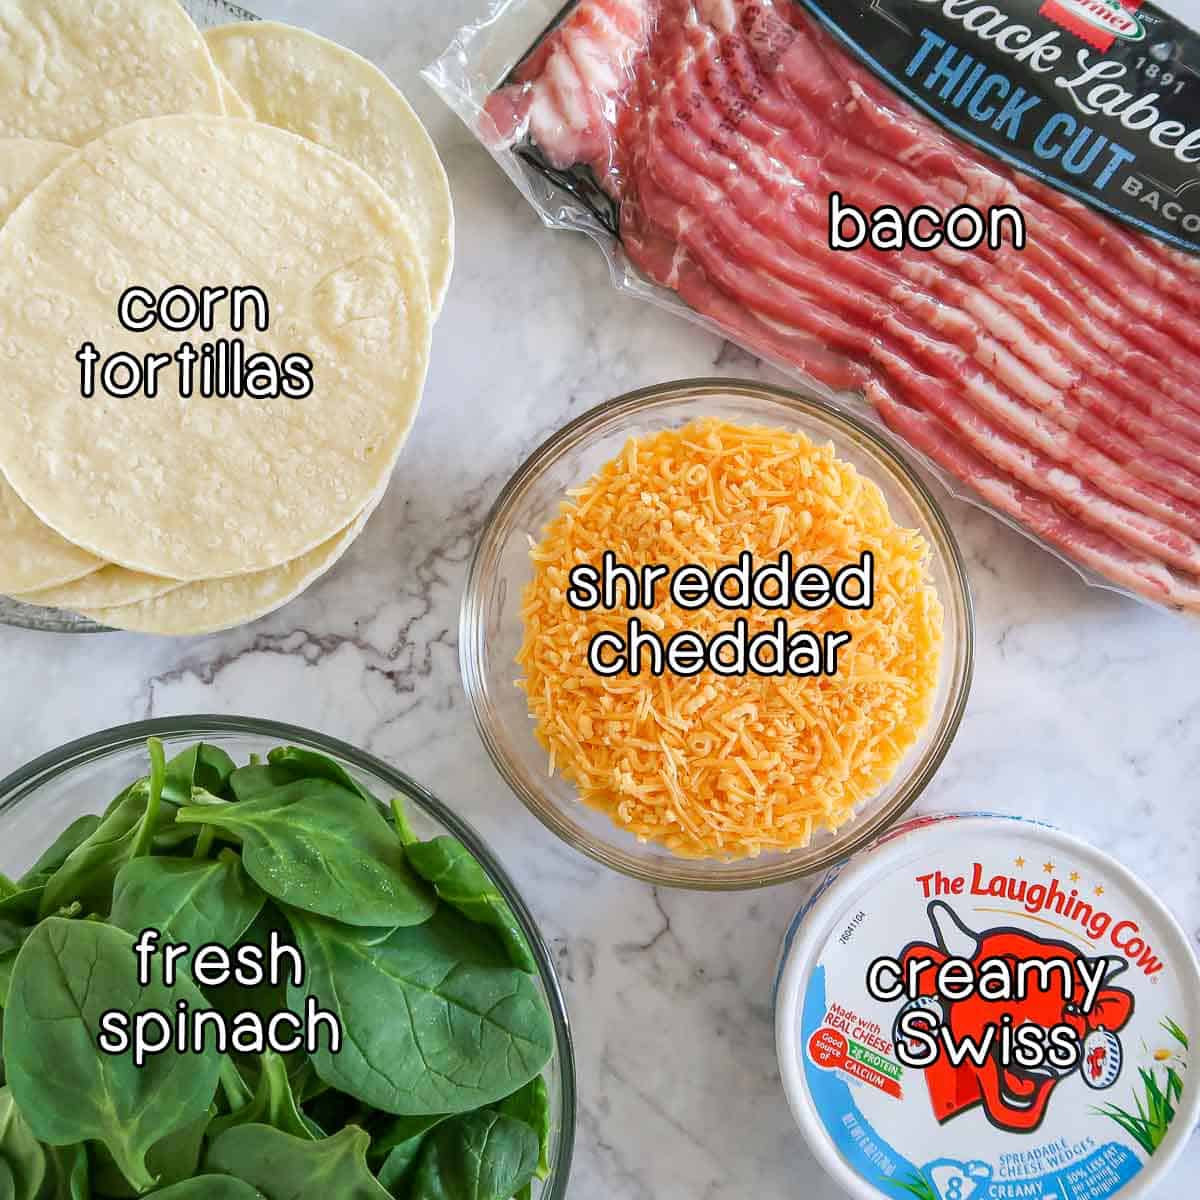 Overhead shot of ingredients - corn tortillas, bacon, shredded cheddar, fresh spinach, and creamy Swiss cheese.